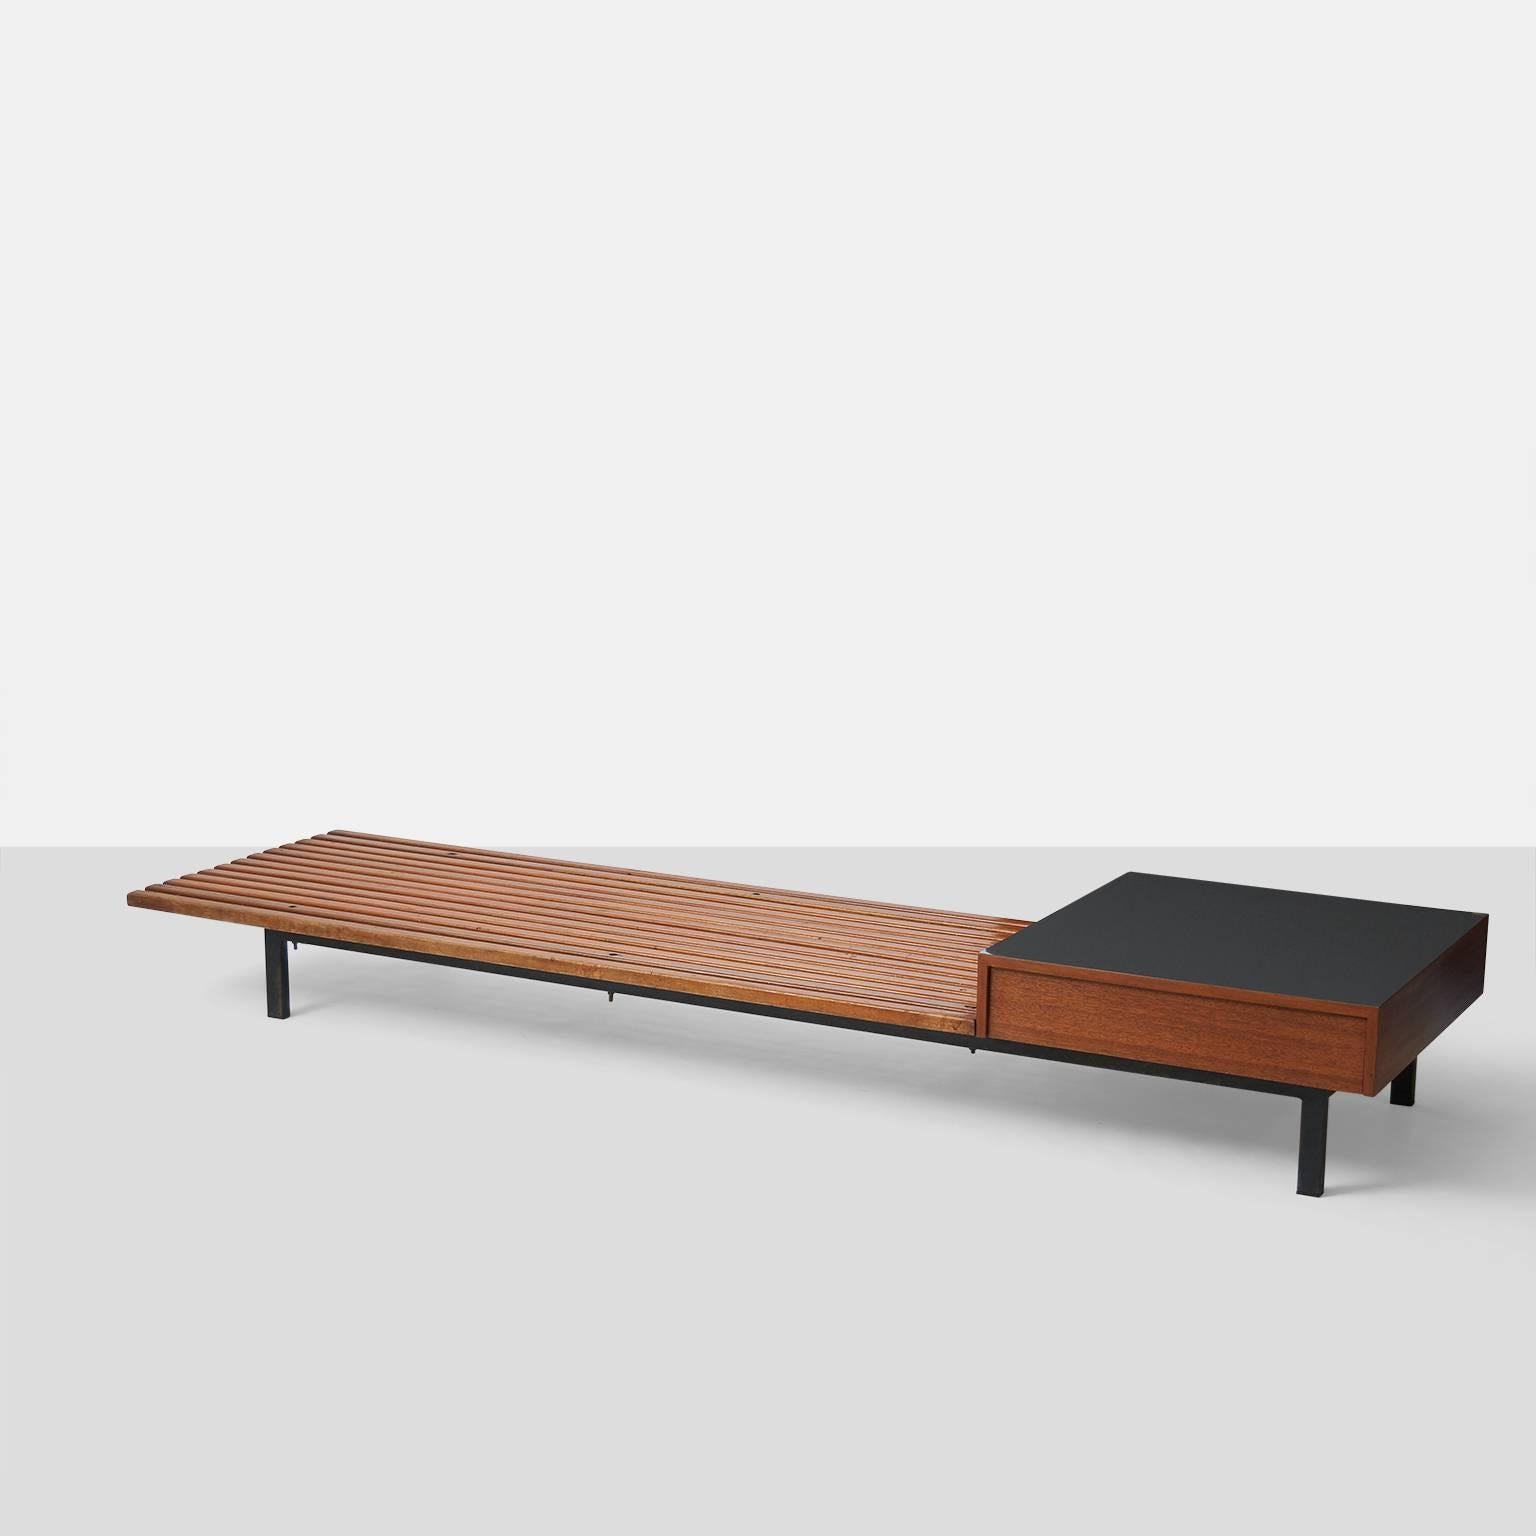 A mahogany slat bench with a side table and drawer from Cite Cansado in Mauritania, 1958. The bench has a steel frame and a drawer that is covered in a gray laminate. Provenance is available.